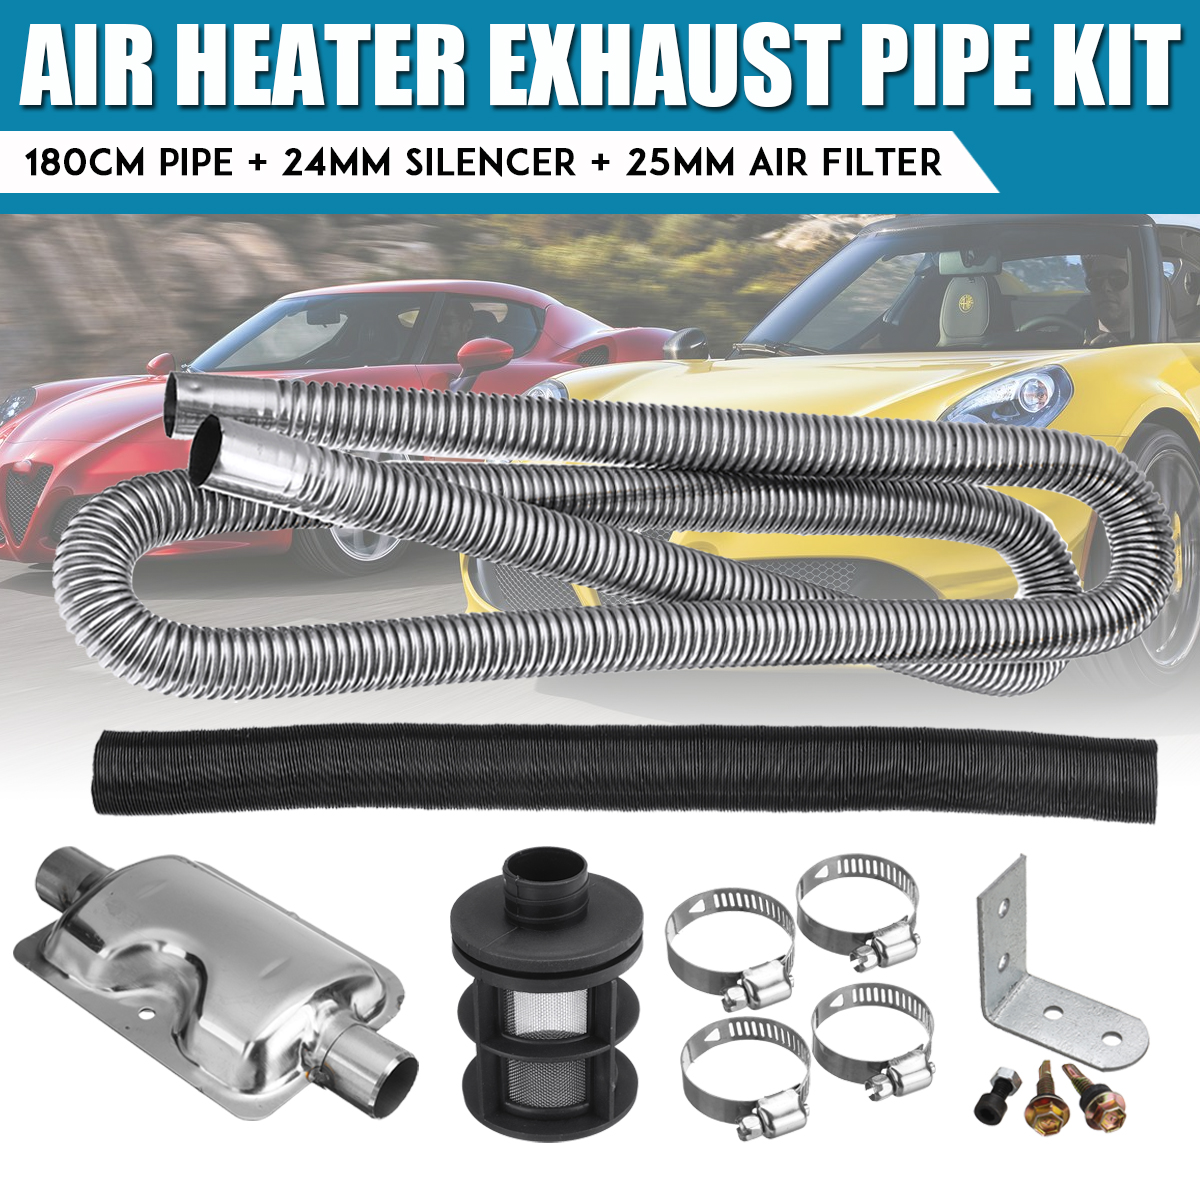 Stainless-Exhaust-Muffler-Silencer-Clamps-Bracket-Gas-Vent-Hose-Portable-180cm-Pipe-Silence-For-Air--1695770-1